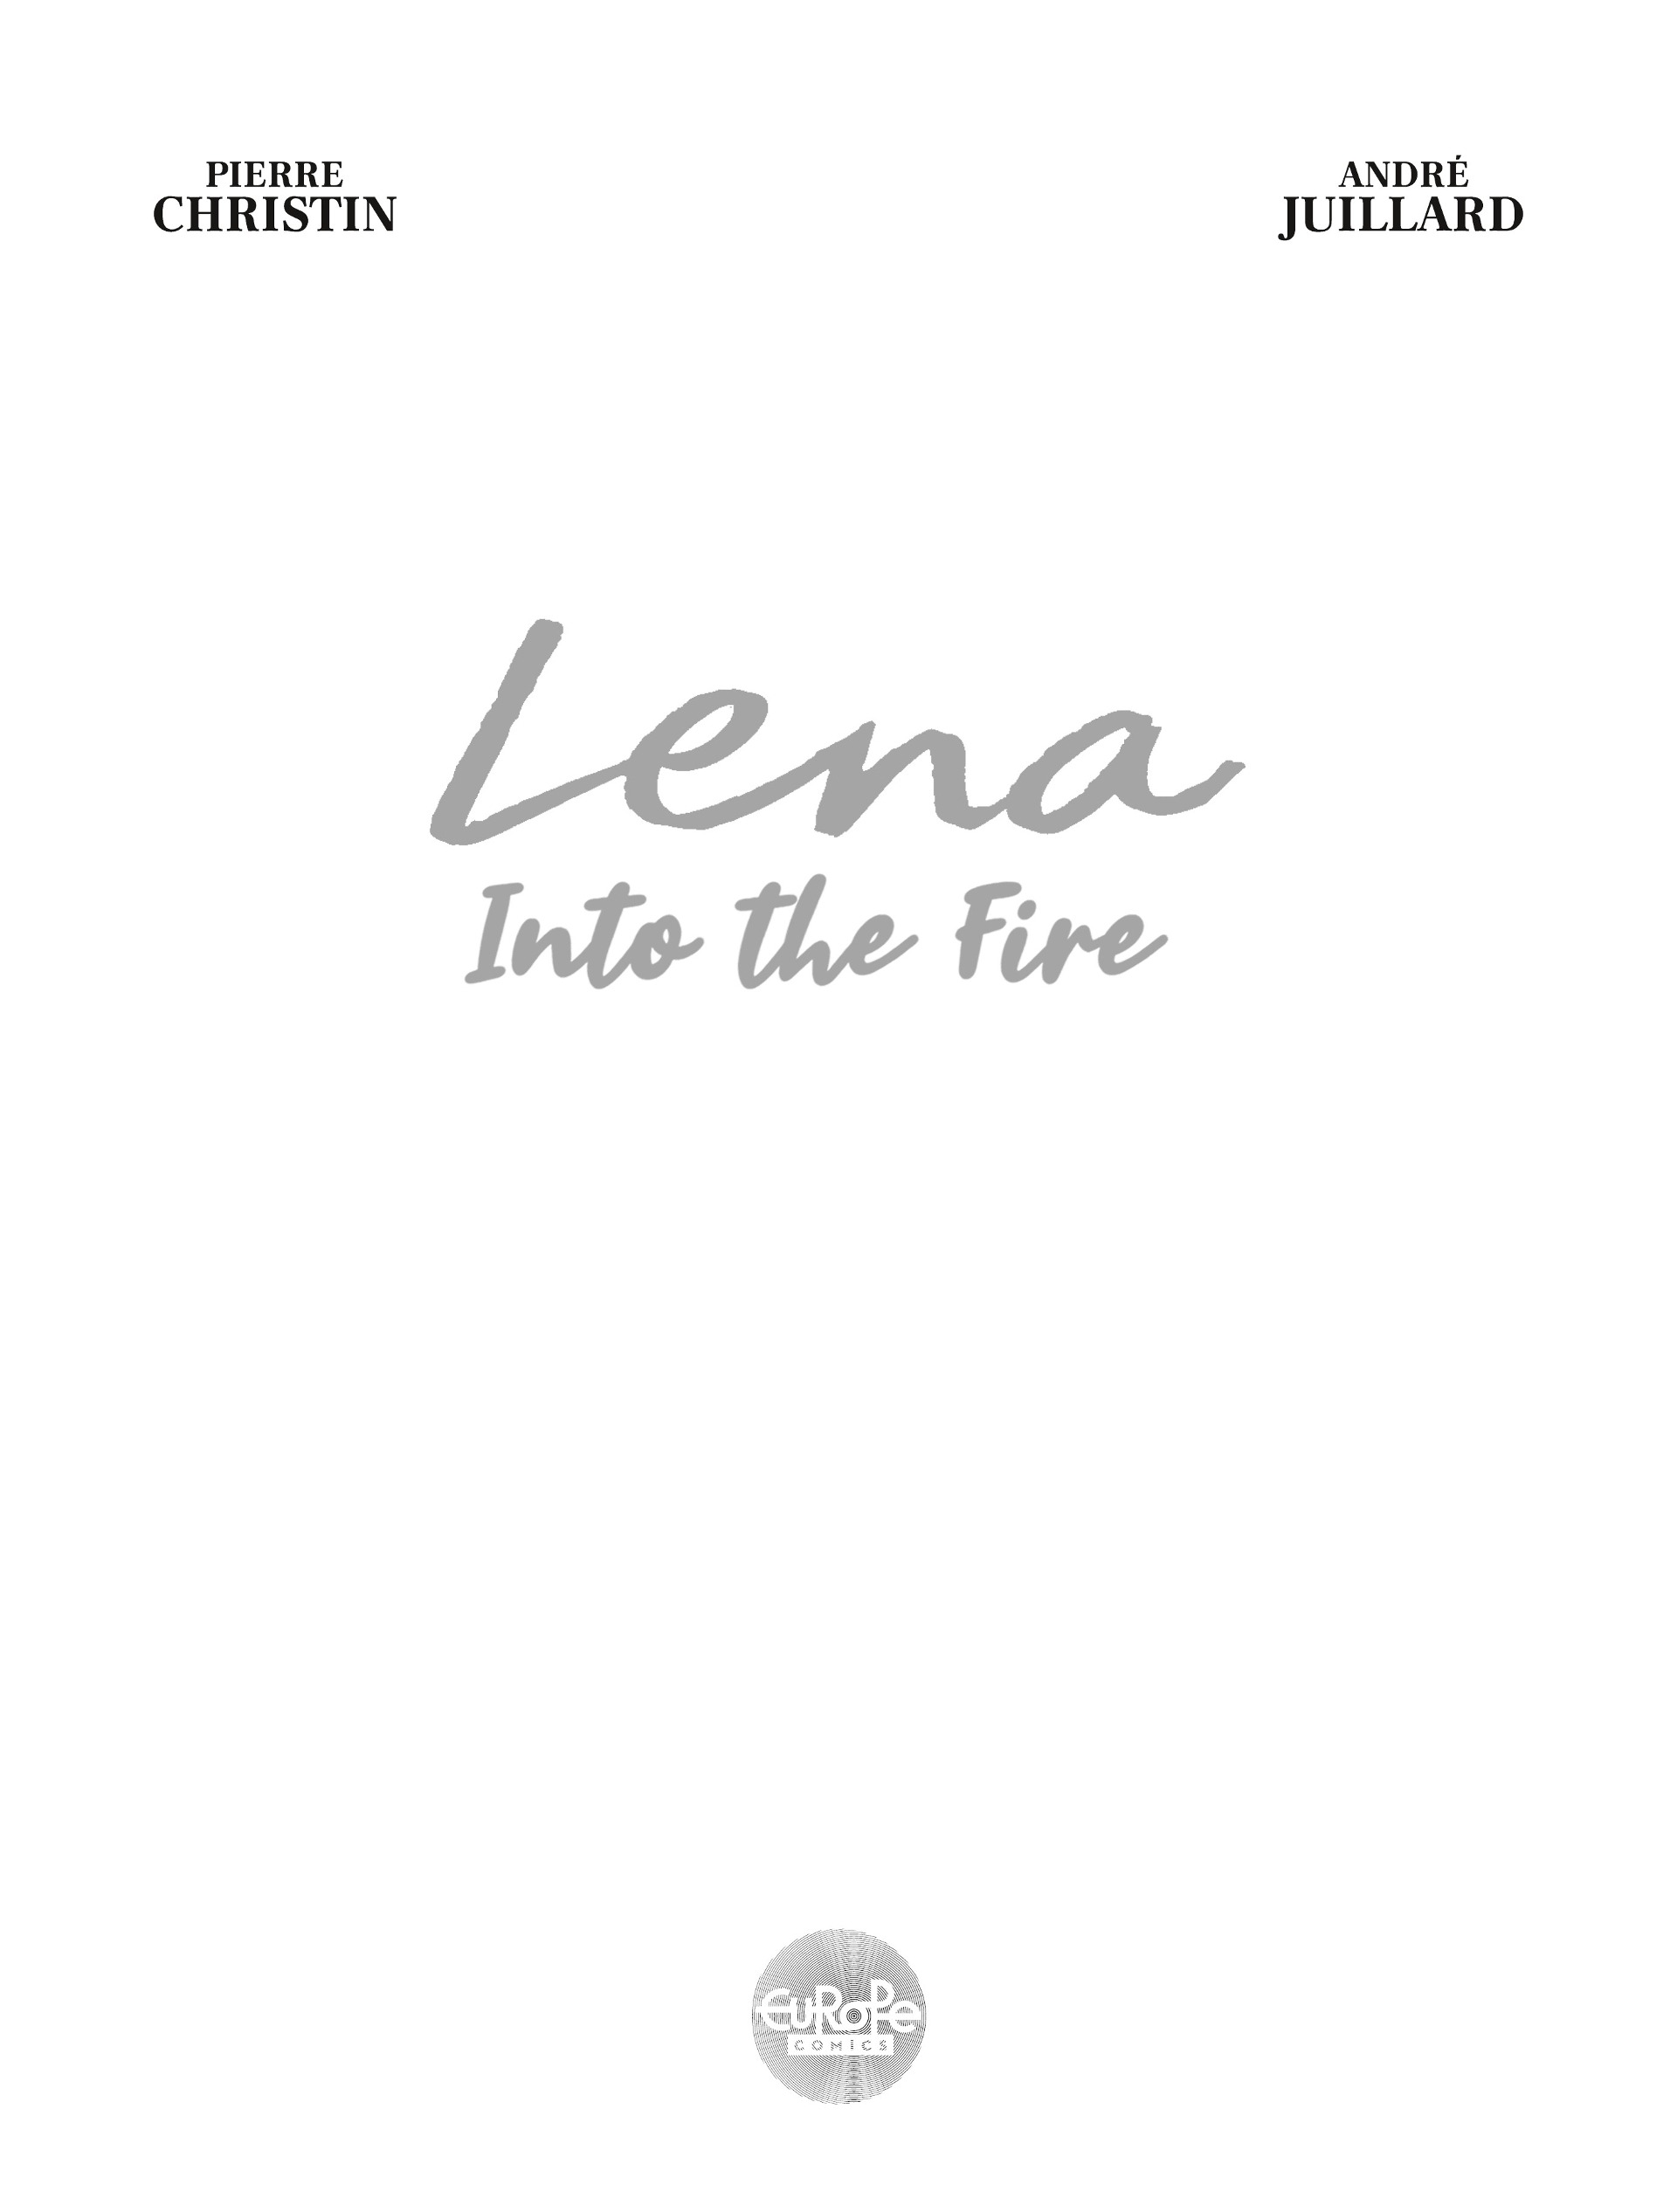 Read online Lena comic -  Issue #3 - 2